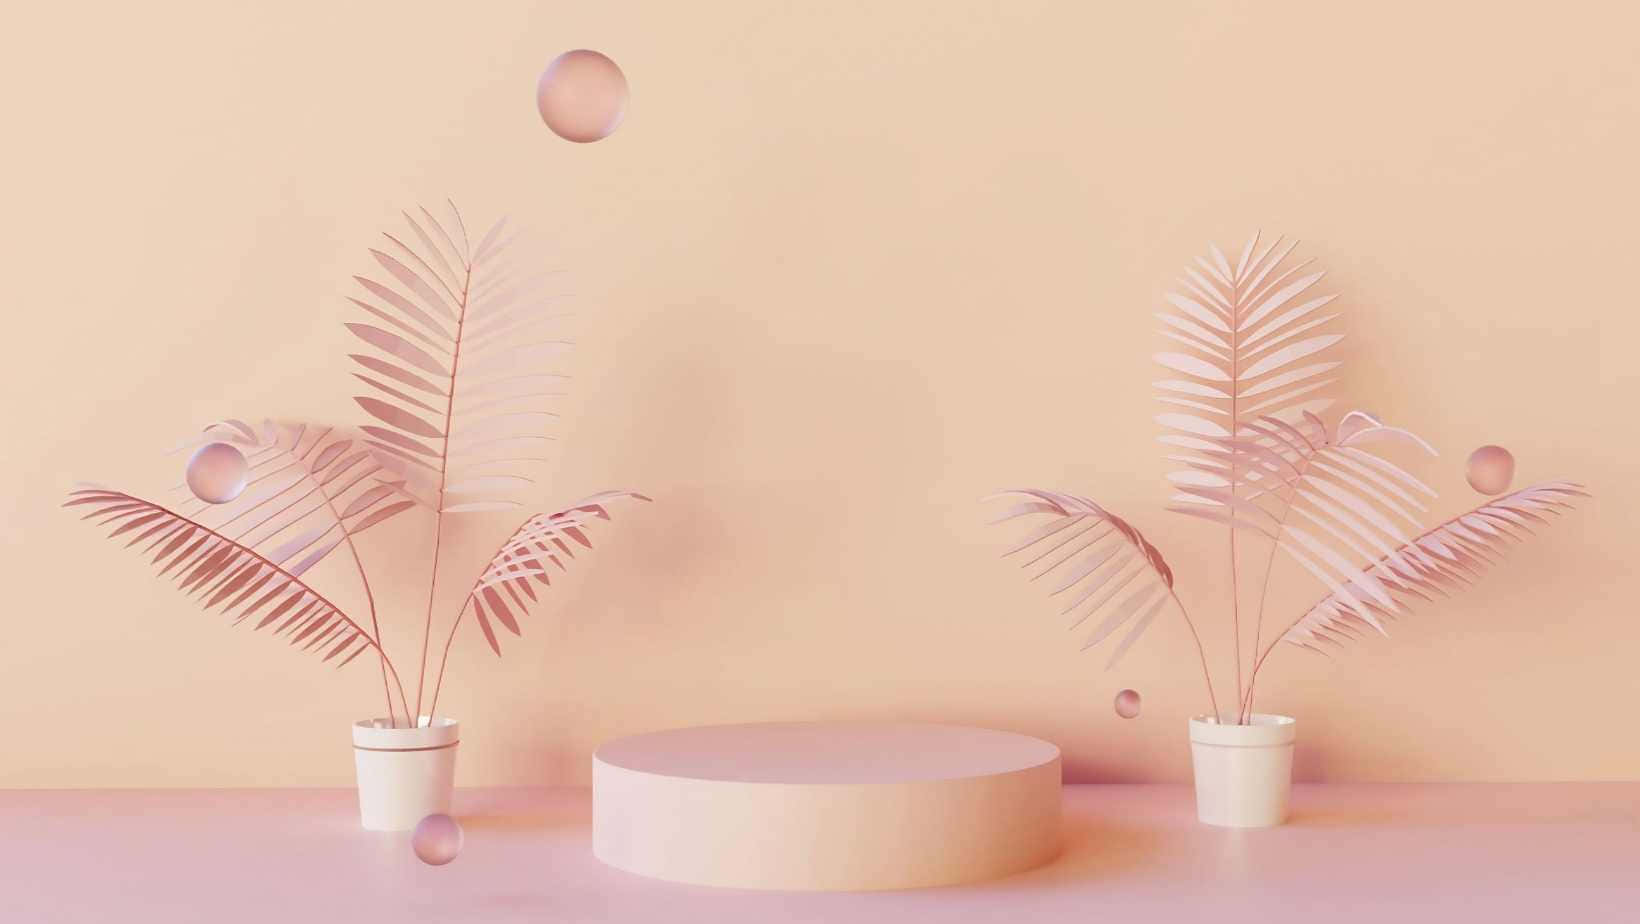 Pastel Themed Platform For Product Background For Photoshoot